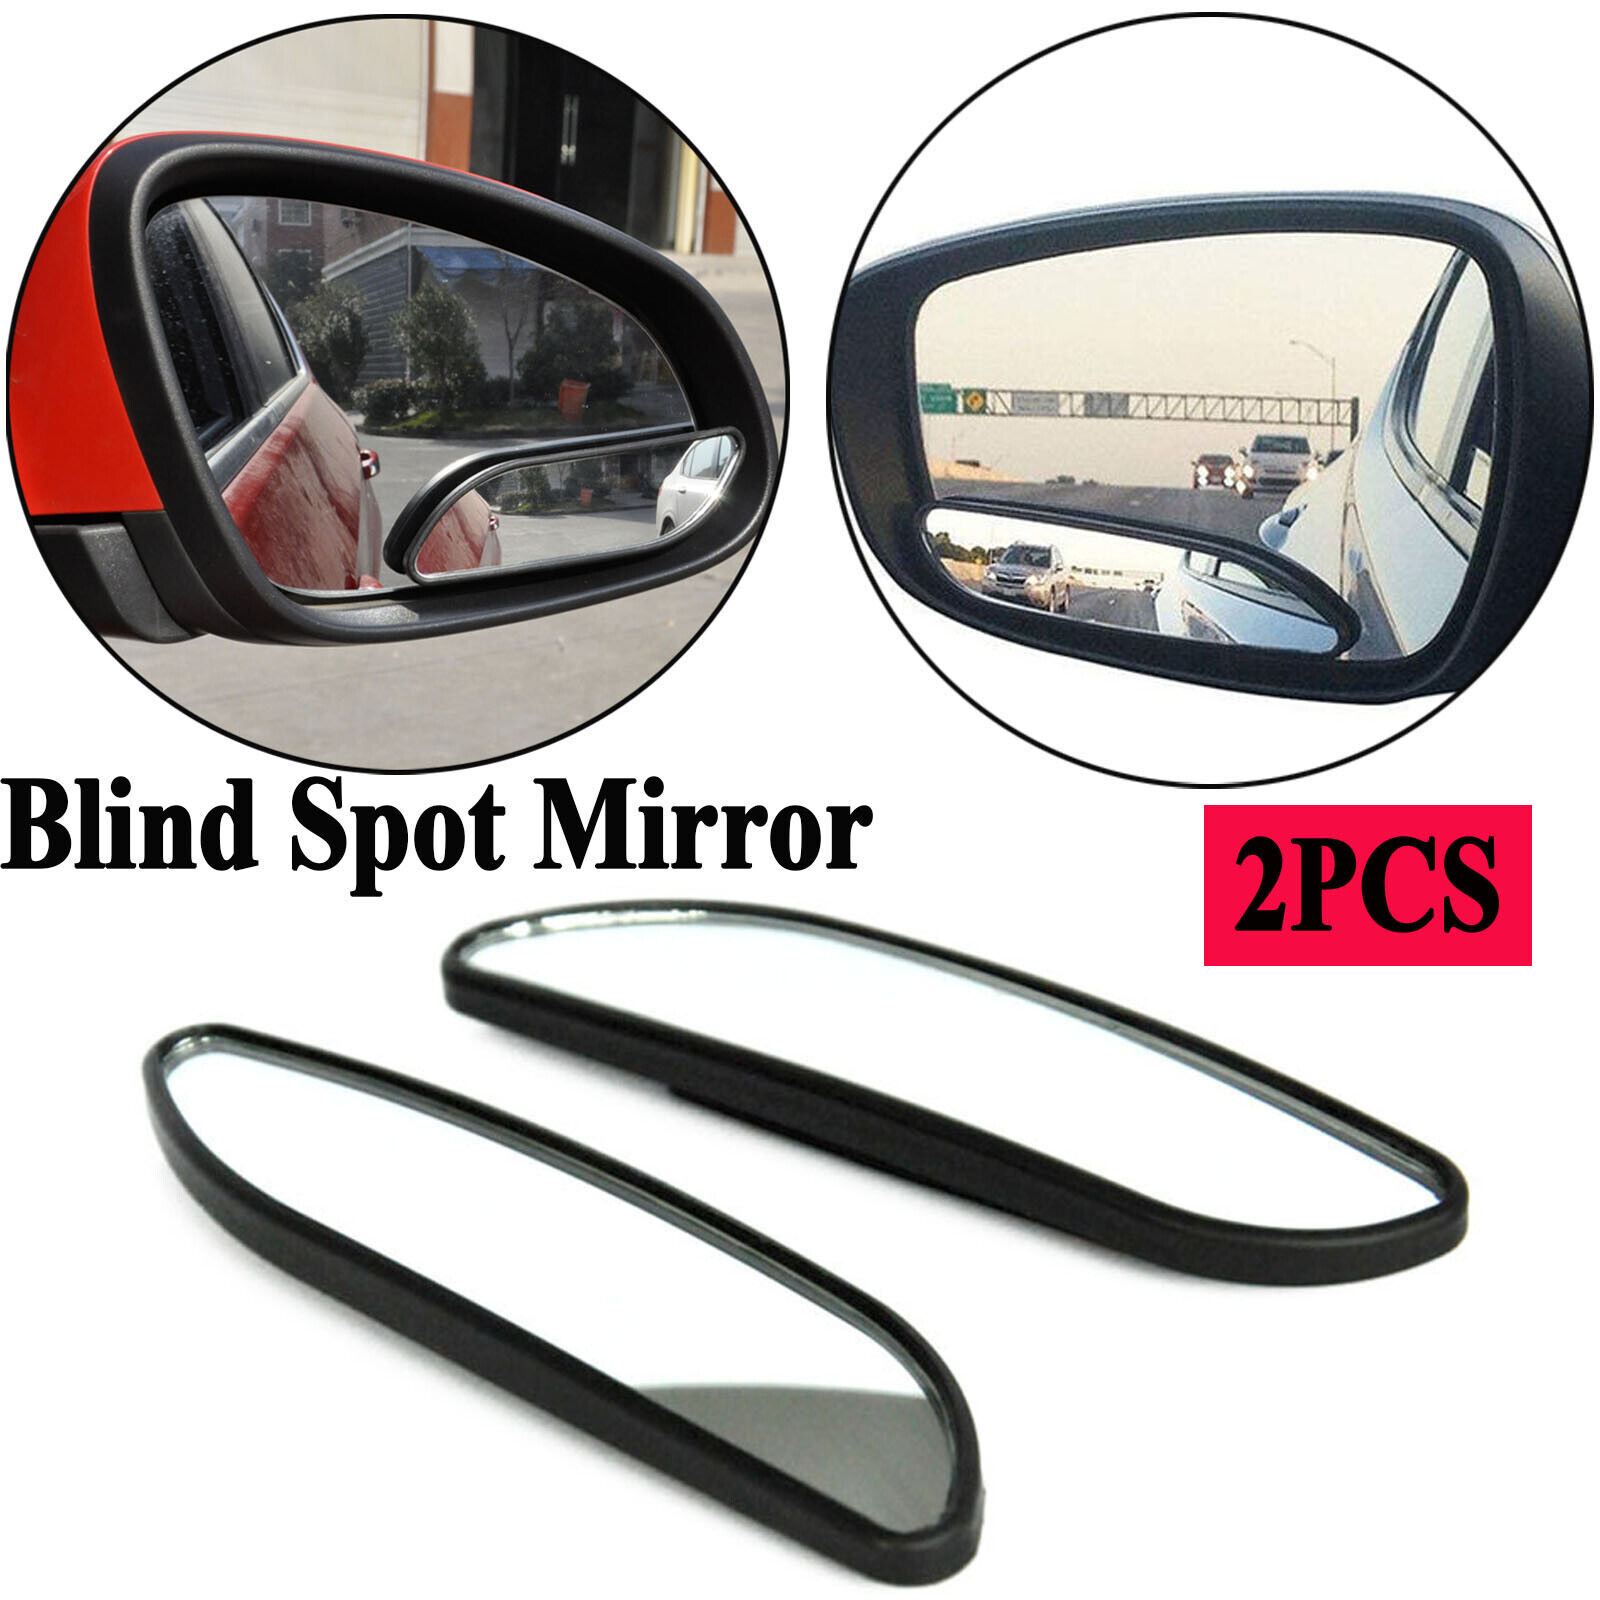 2X Blind Spot Mirror Auto 360° Wide Angle Convex Rear Side View Car Truck SUV